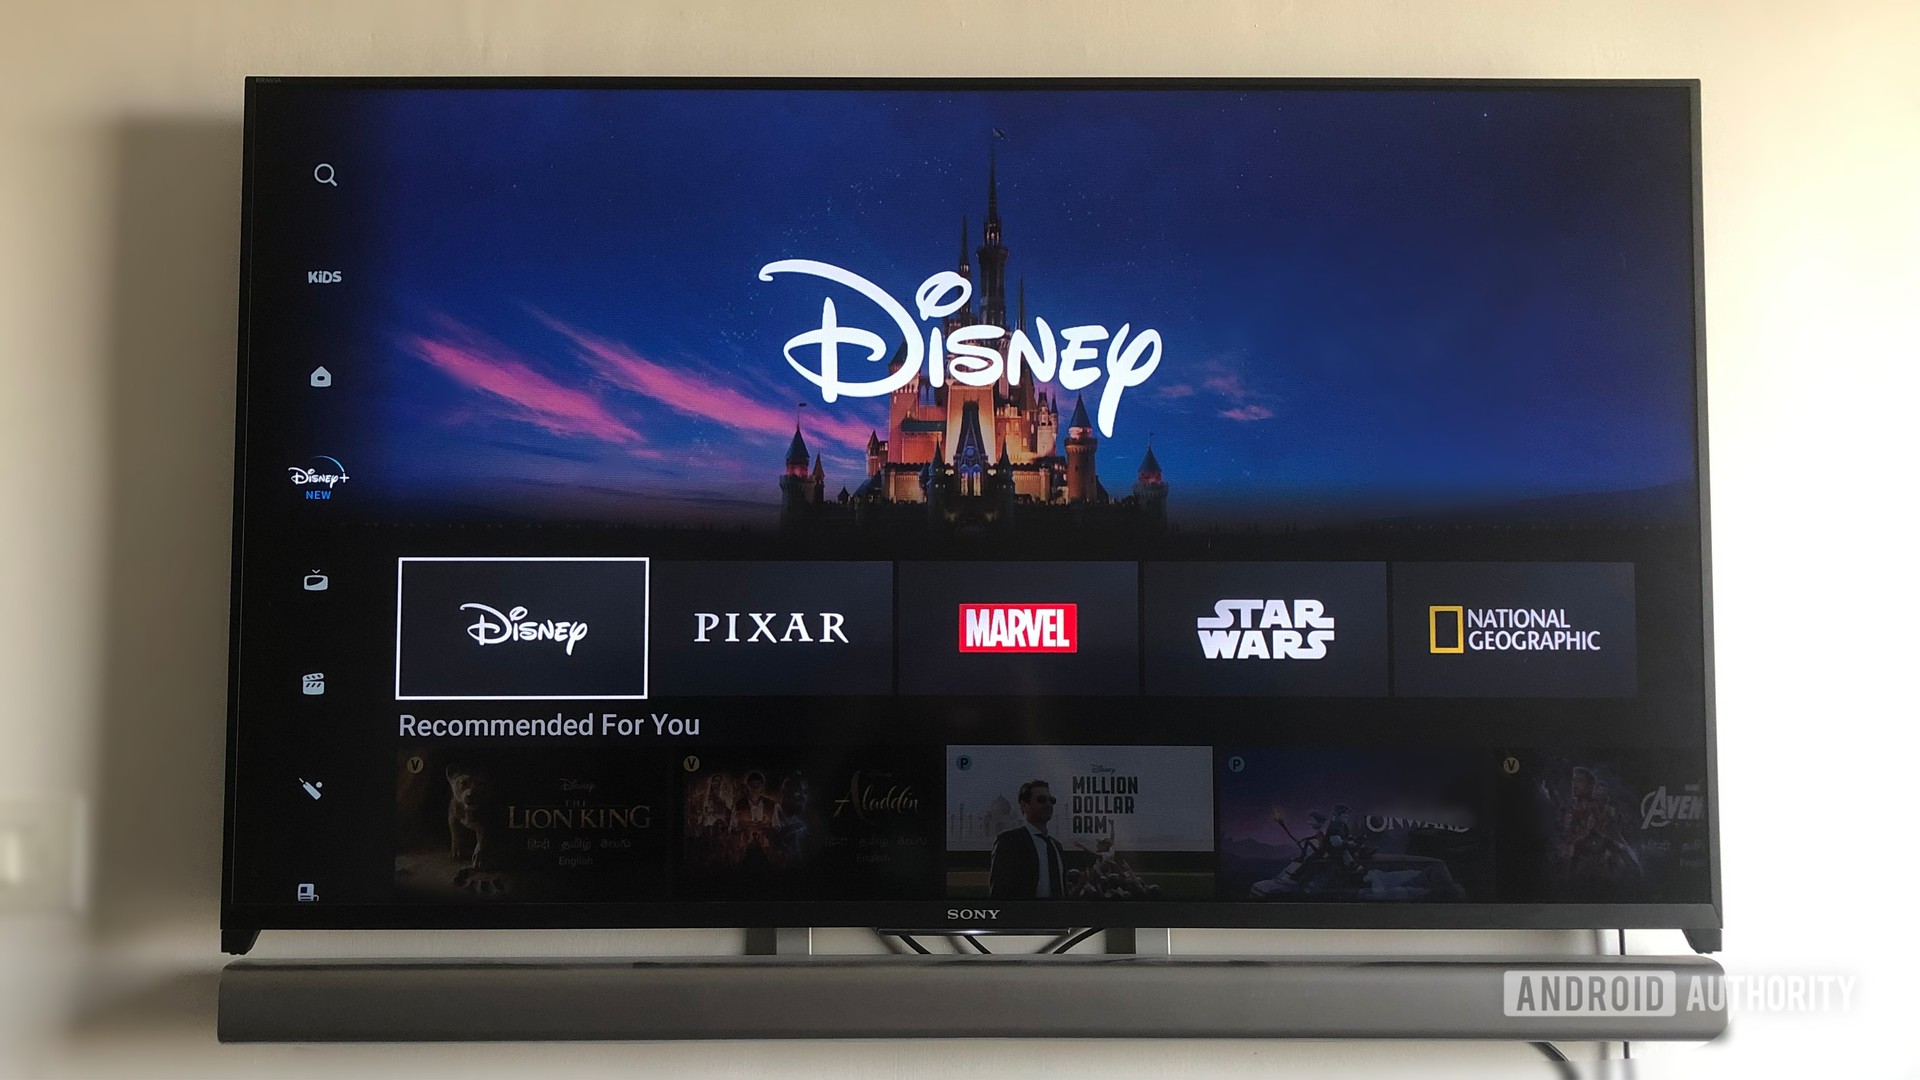 Disney Android TV